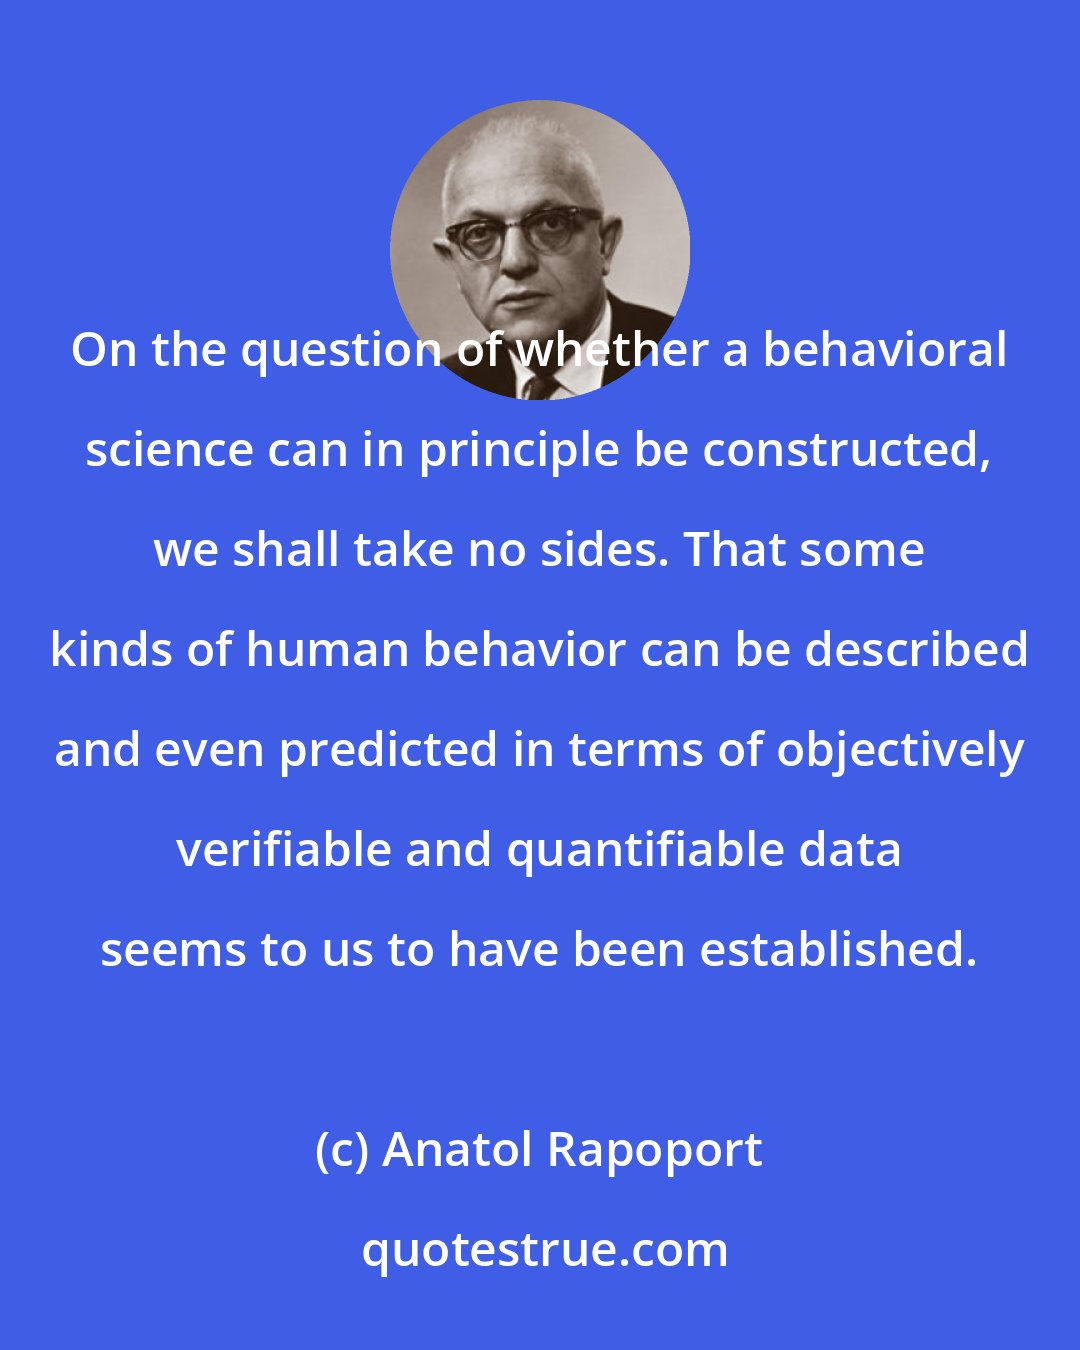 Anatol Rapoport: On the question of whether a behavioral science can in principle be constructed, we shall take no sides. That some kinds of human behavior can be described and even predicted in terms of objectively verifiable and quantifiable data seems to us to have been established.